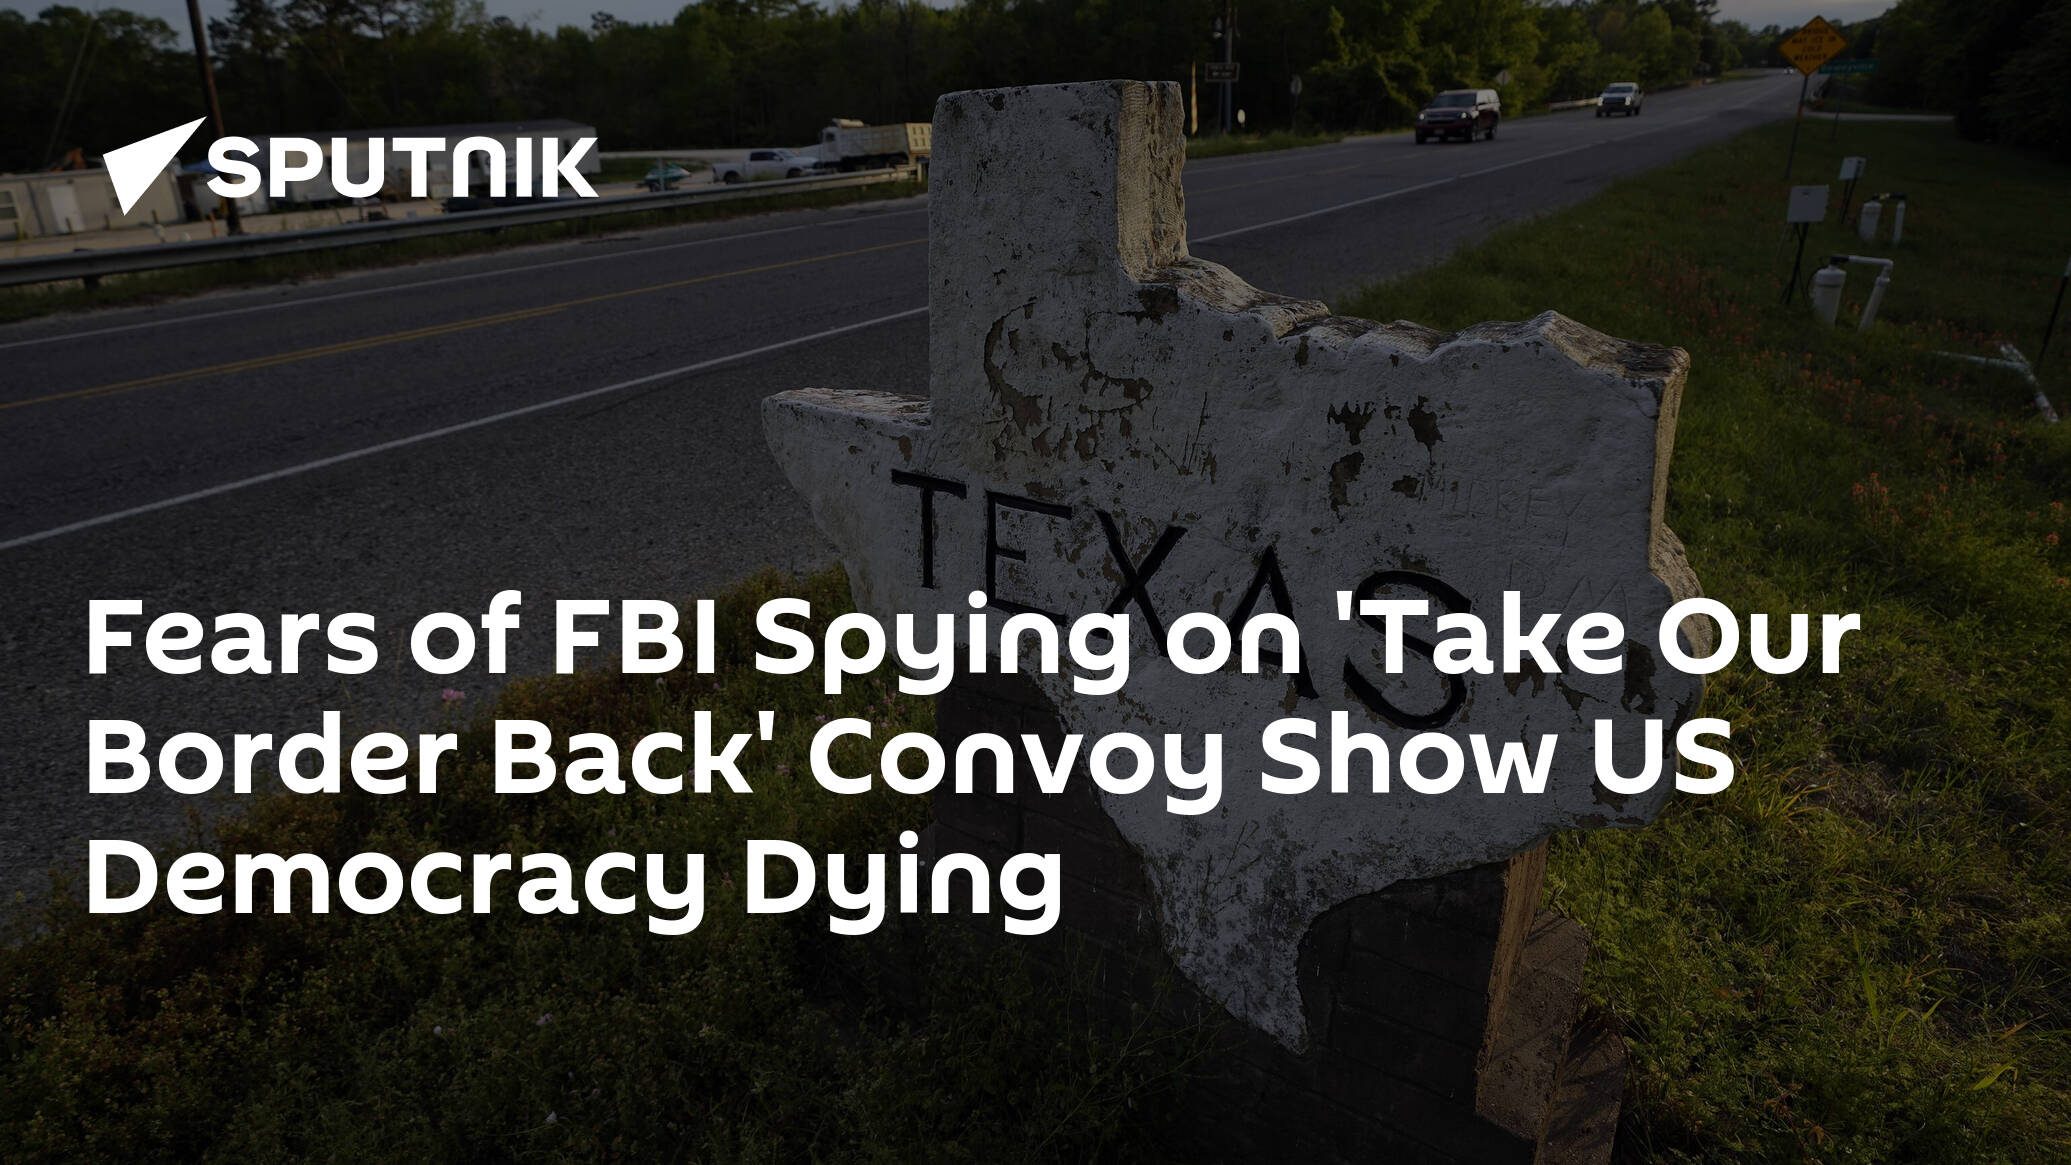 Fears About FBI Infiltration of 'Take Our Border Back' Convoy Indicate Erosion of Democracy in US